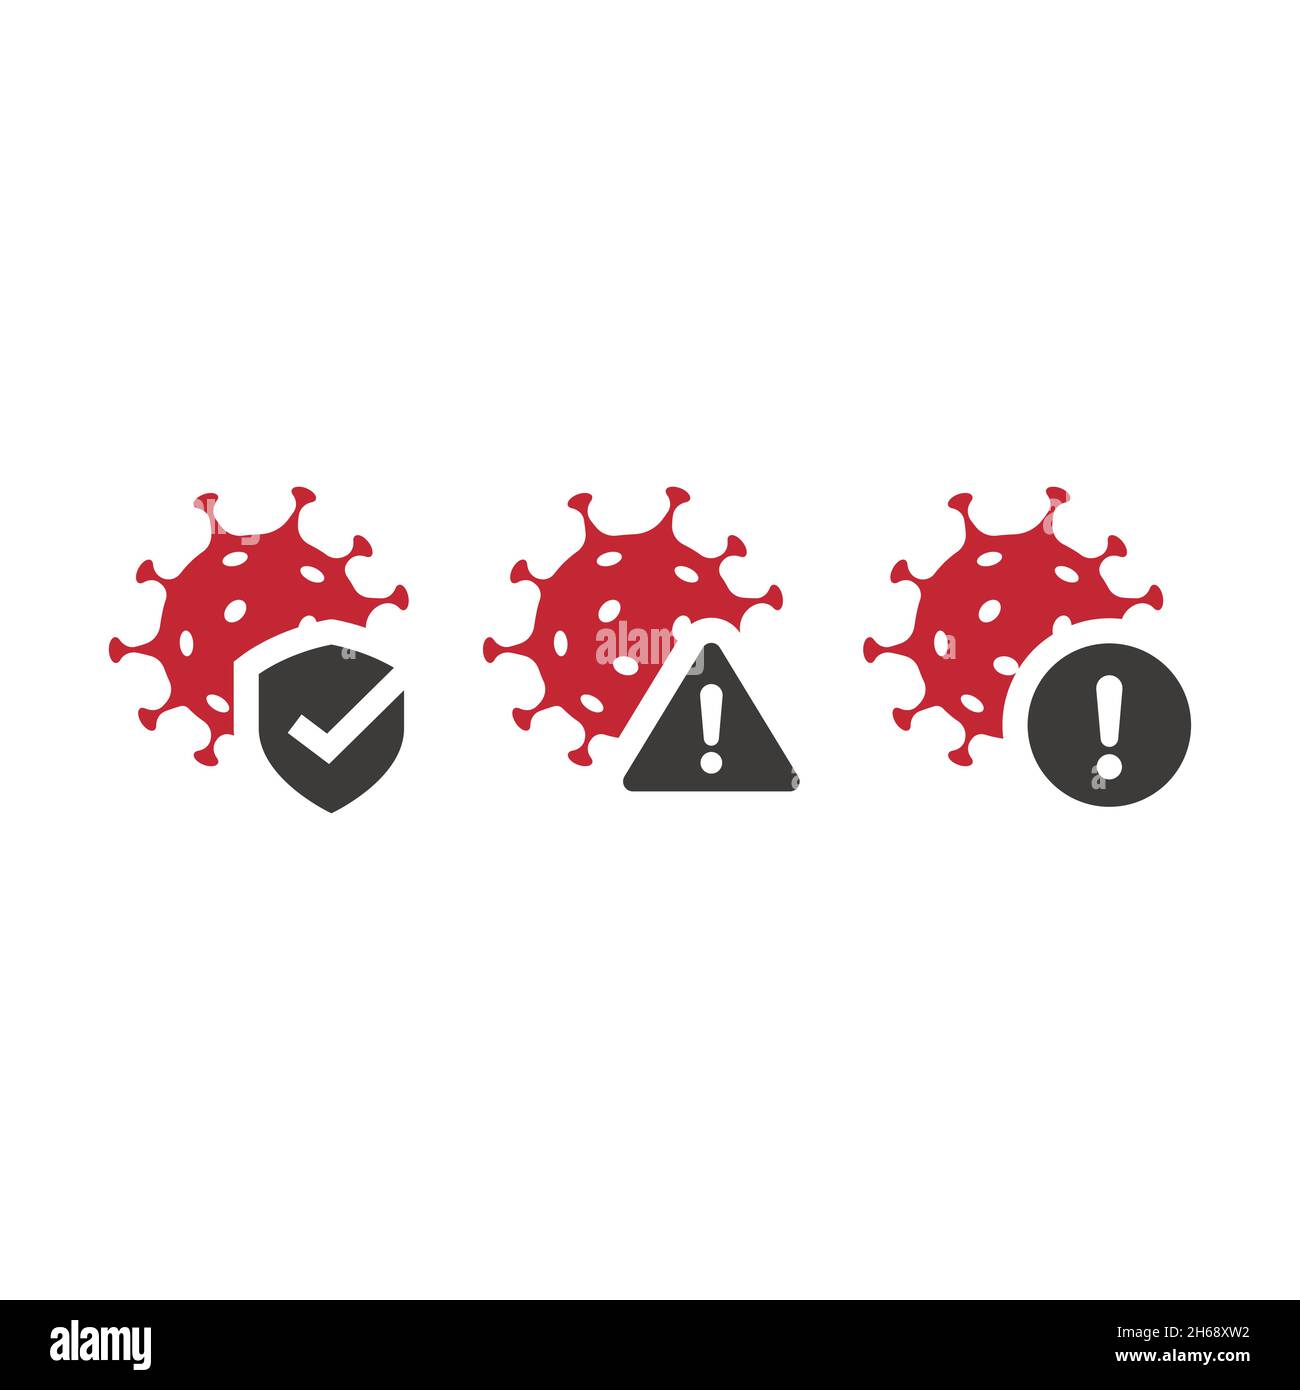 Covid-19 virus with shield and exclamation mark. Coronavirus vector icon. Stock Vector